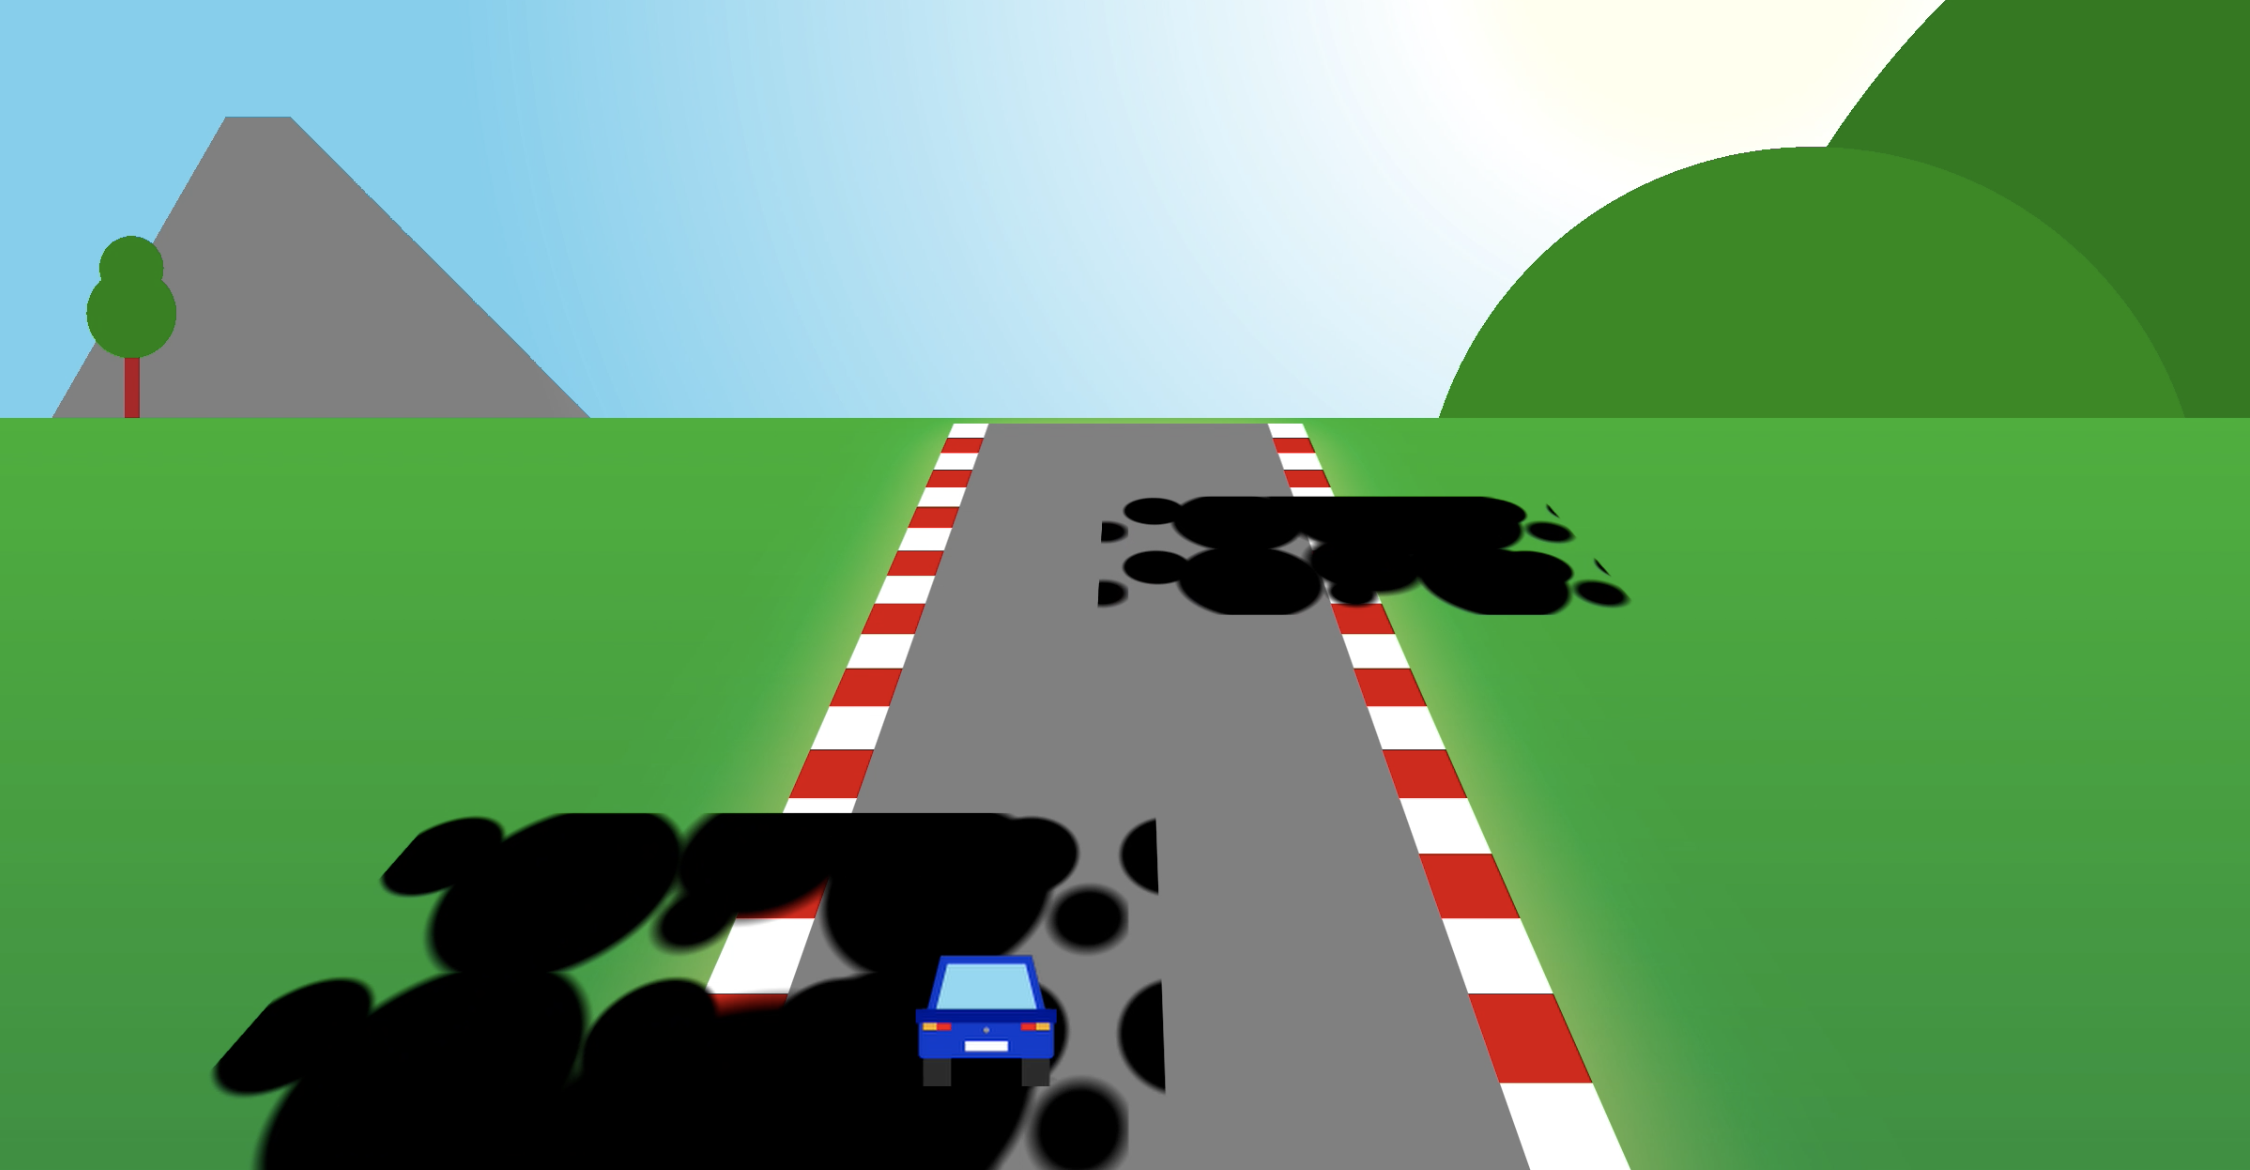 Screenshot of the game with the car moving on top of a grease stain and no game over message